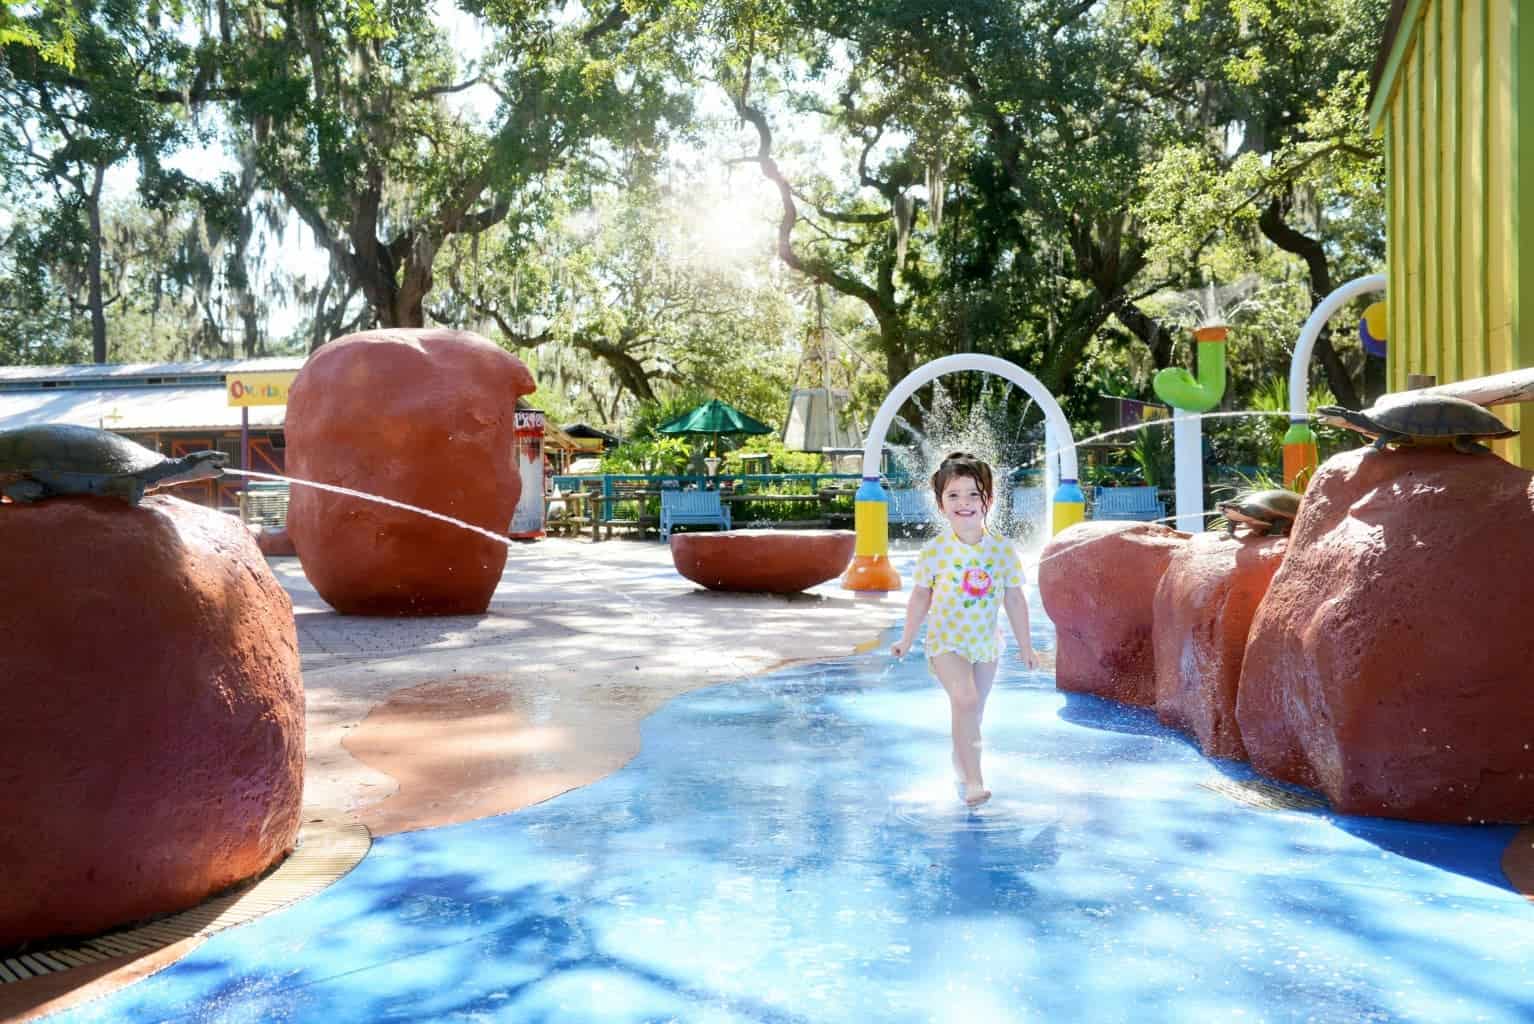 Lowry Park Zoo Splash Pad Things to Do in Tampa